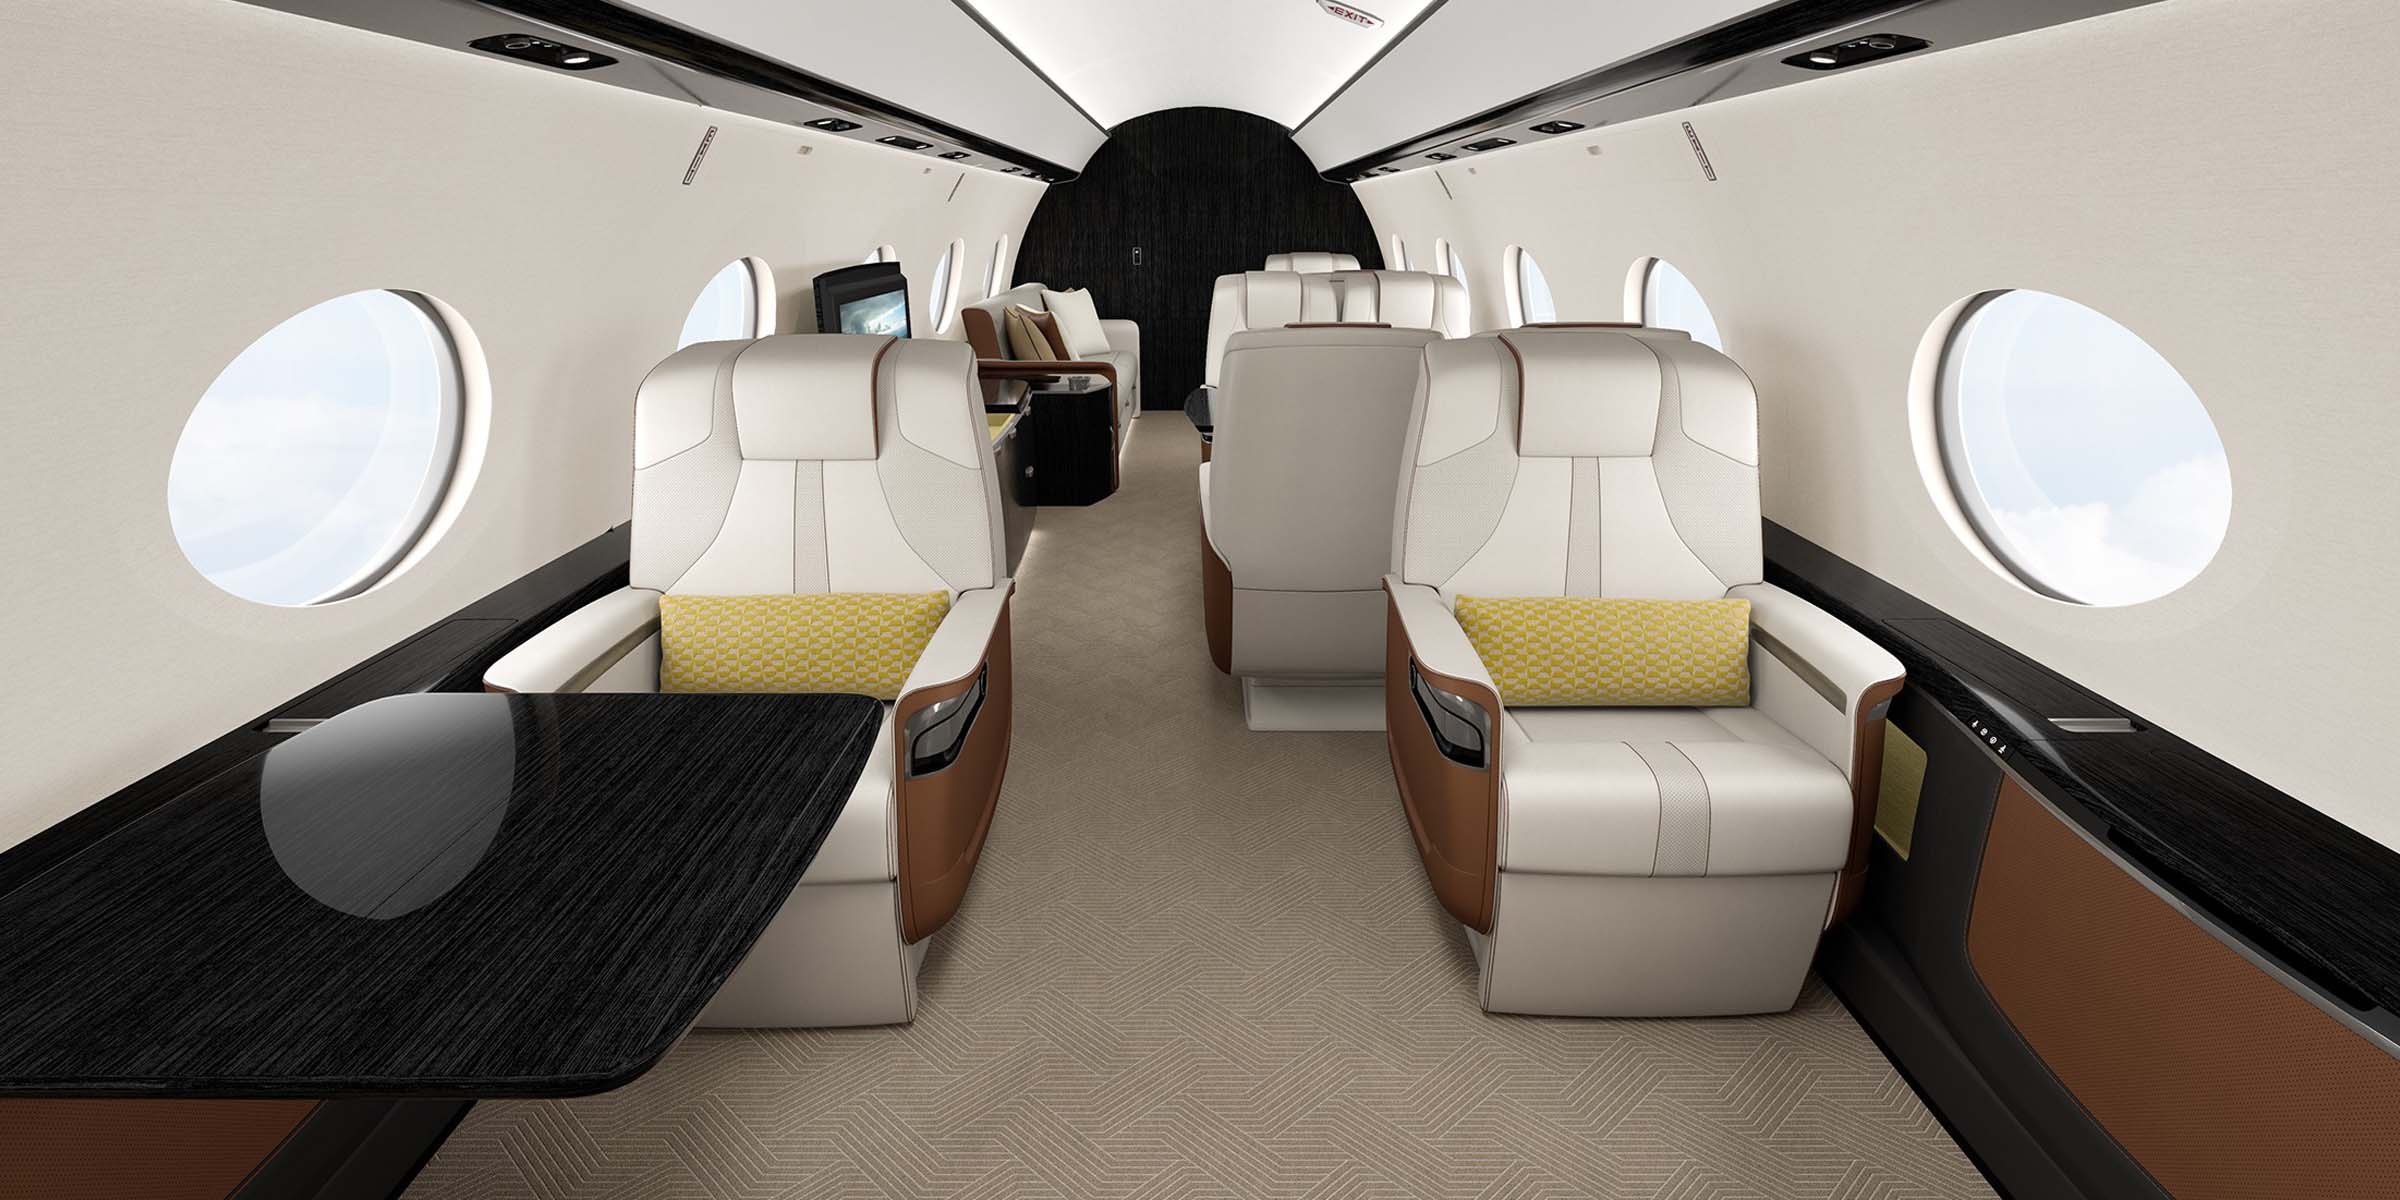 Going Up: Private Jets Service More Than Just Rock Stars